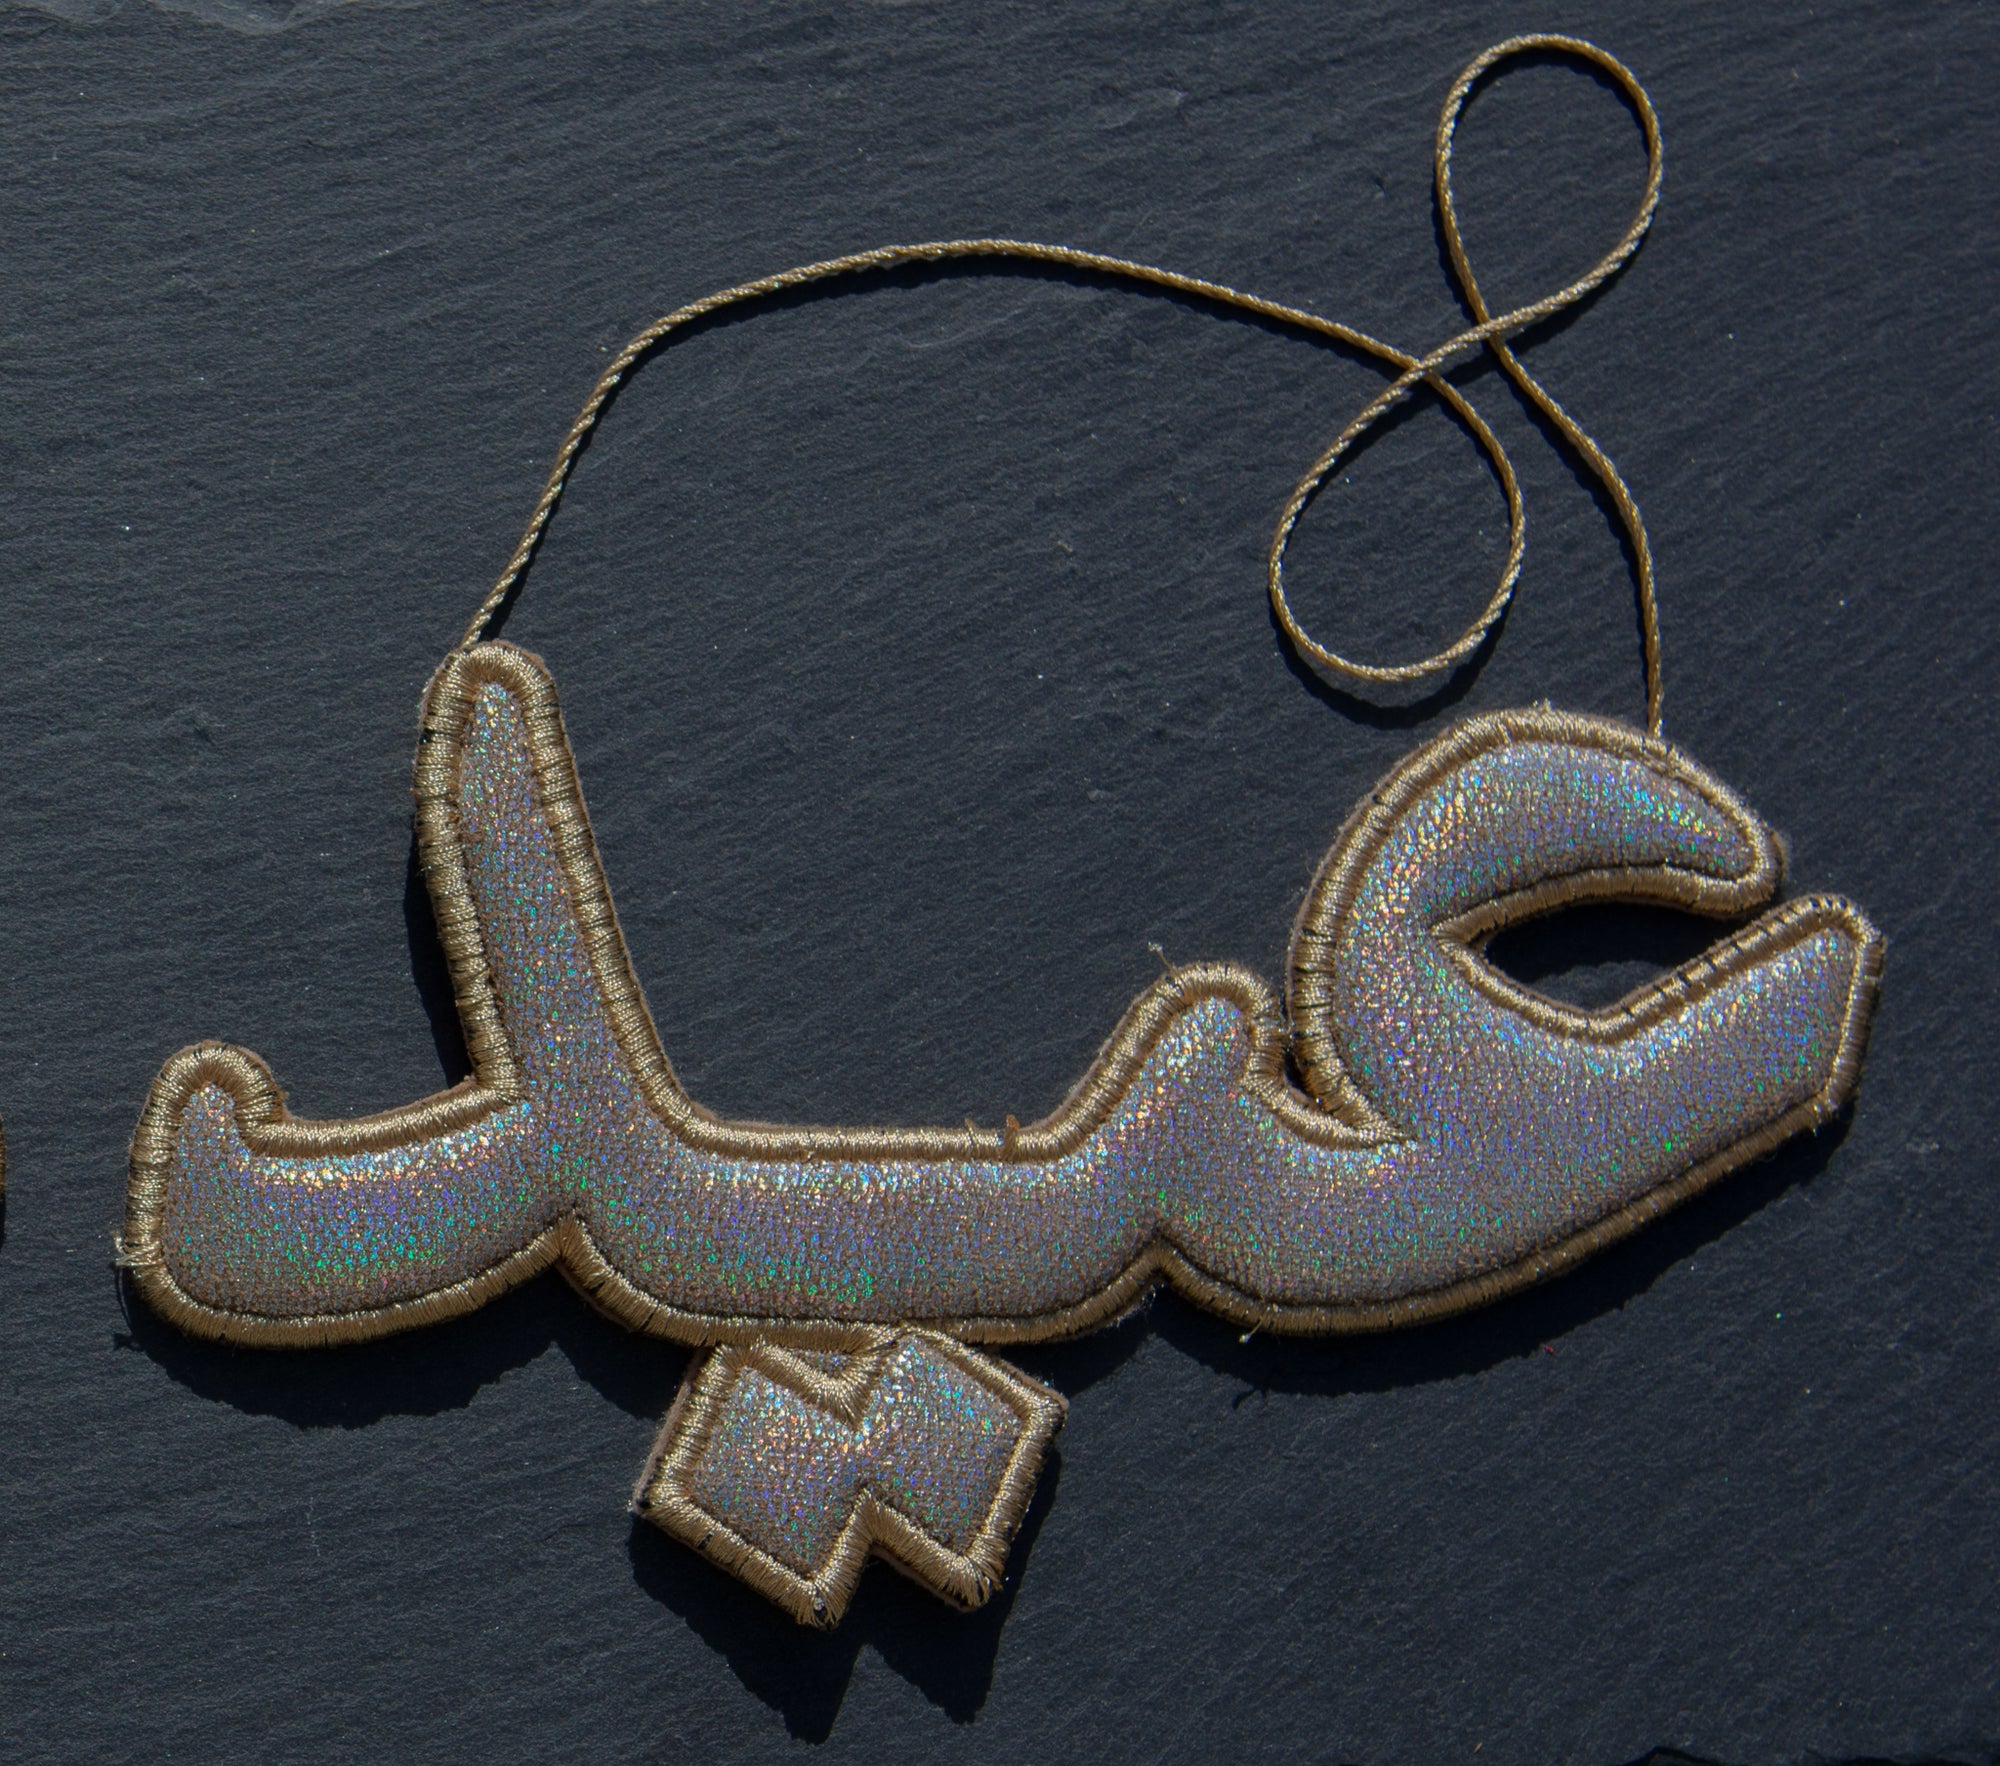  &quot;عيد&quot; Eid Silver Arabic Calligraphy Embroidery Ornament